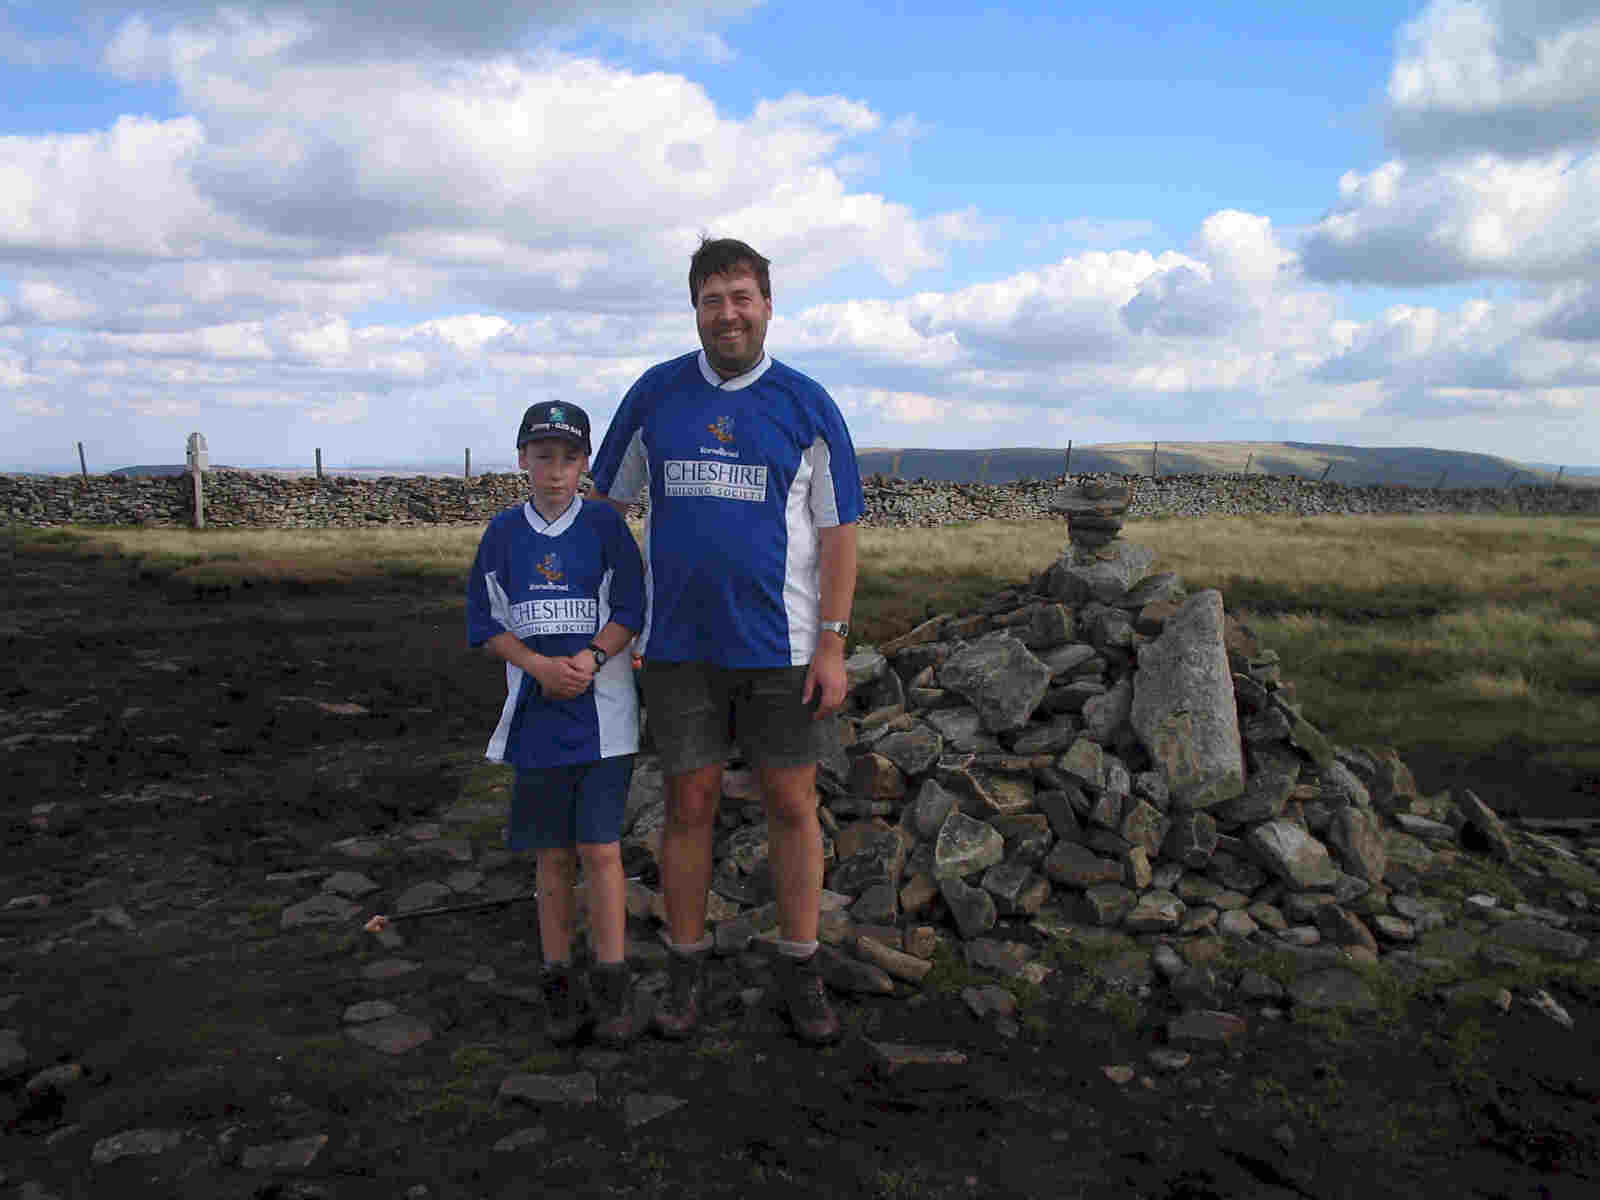 Tom and Jimmy on the summit of Buckden Pike G/NP-009, with Great Whernside G/NP-008 in the background